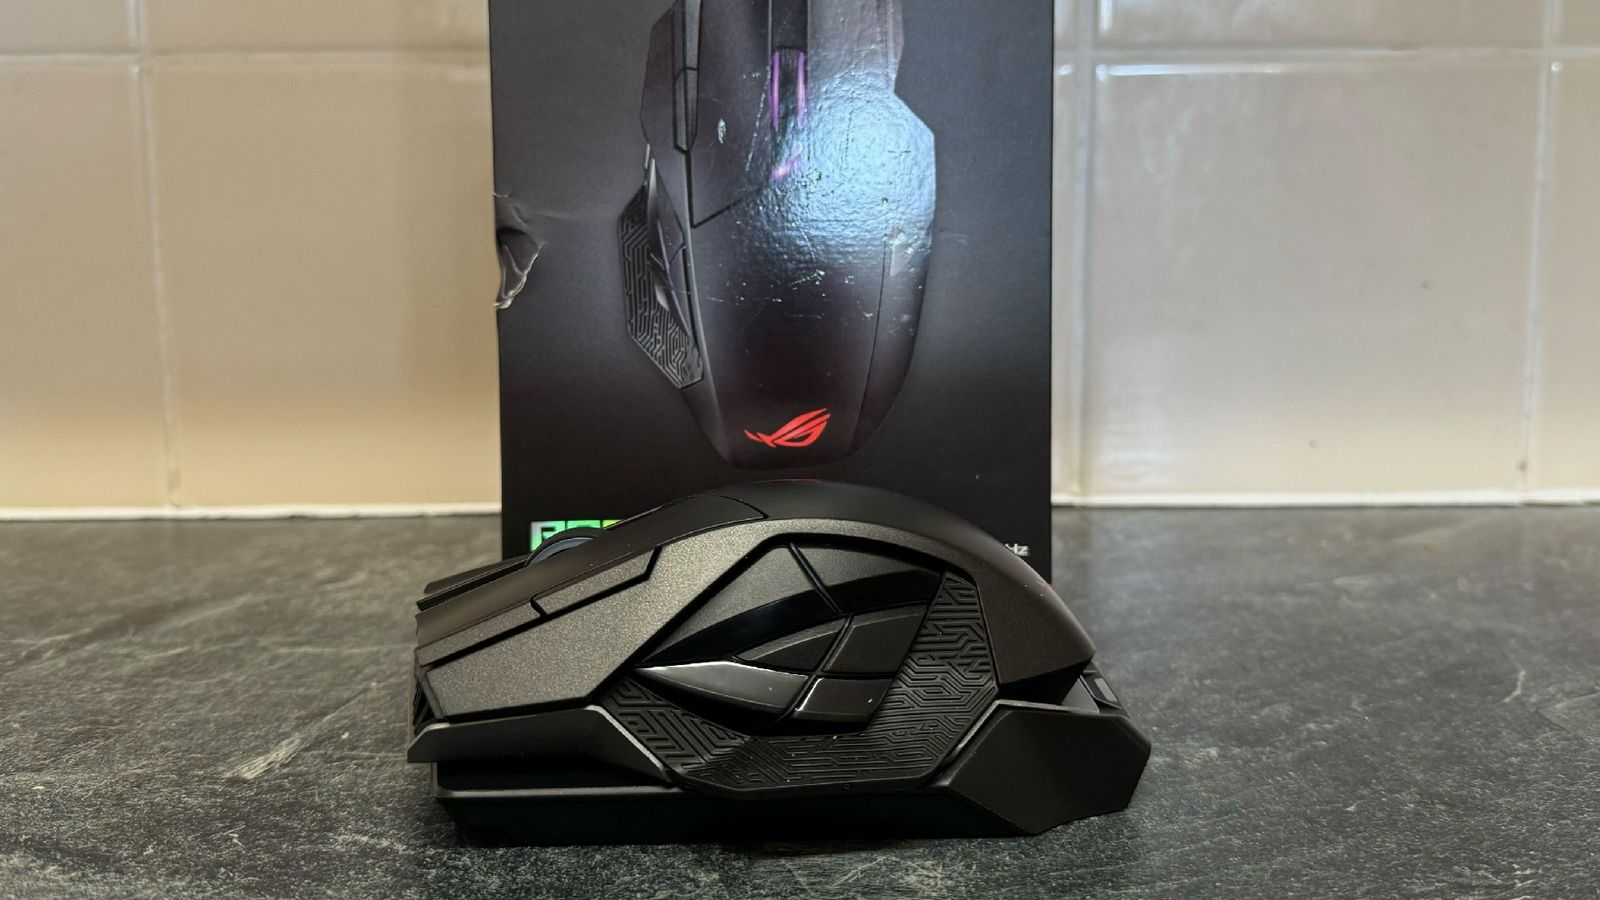 Side view of the ASUS ROG Spatha X in front of its box and a tiled wall